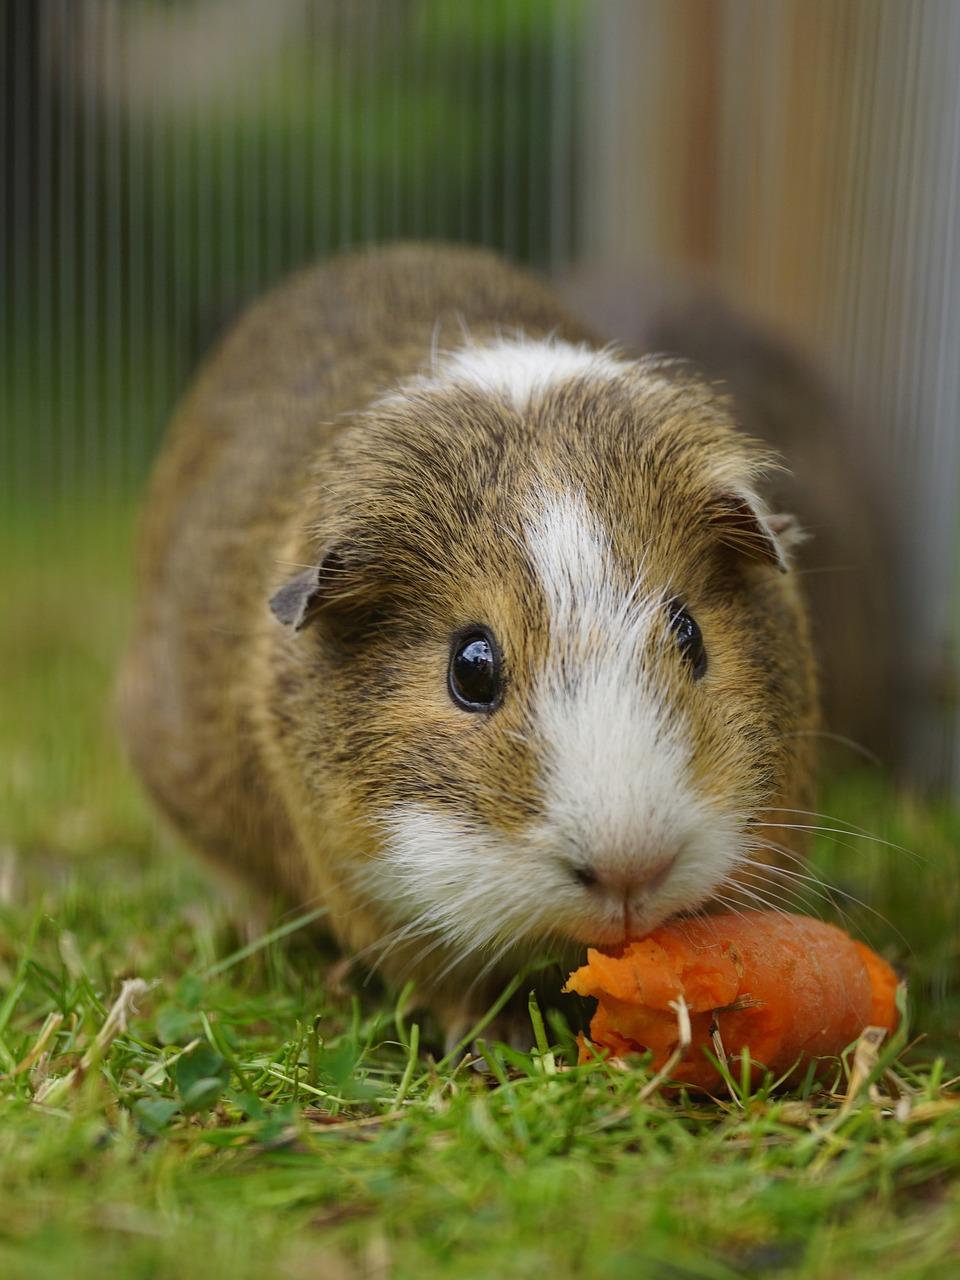 What to Feed Baby Guinea Pigs? (Hay, Milk, or Other Grass?)